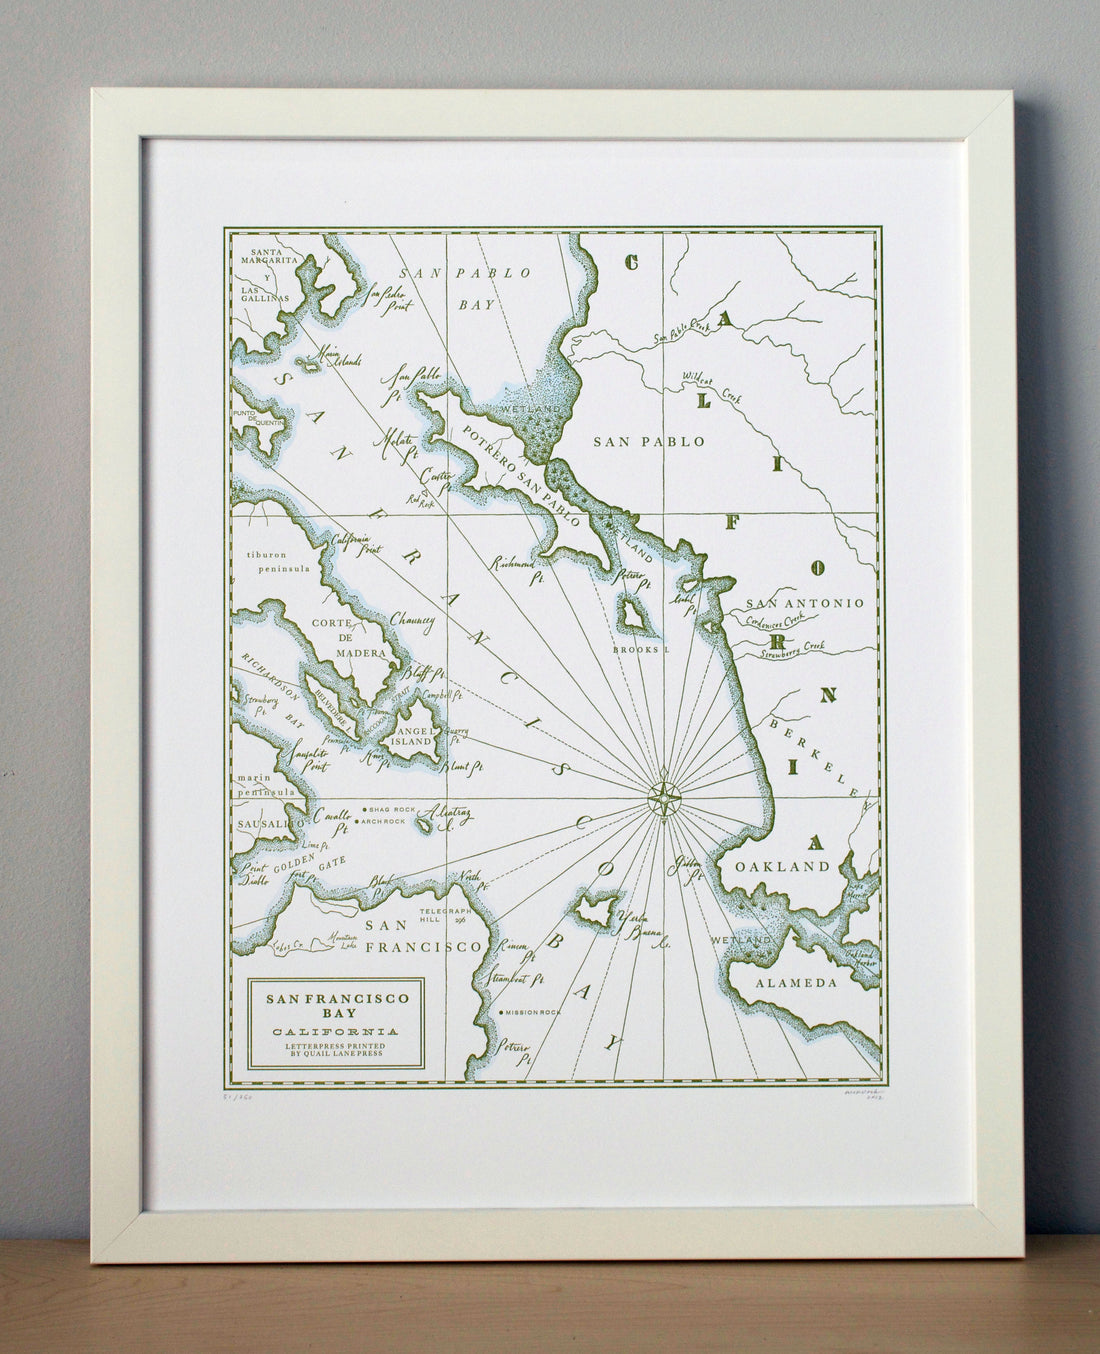 California Wall art letterpress printed map of the Northern Califnornia San Francisco Bay printed on archival grade cotton paper with watercolor wash as an accent to shorelines 